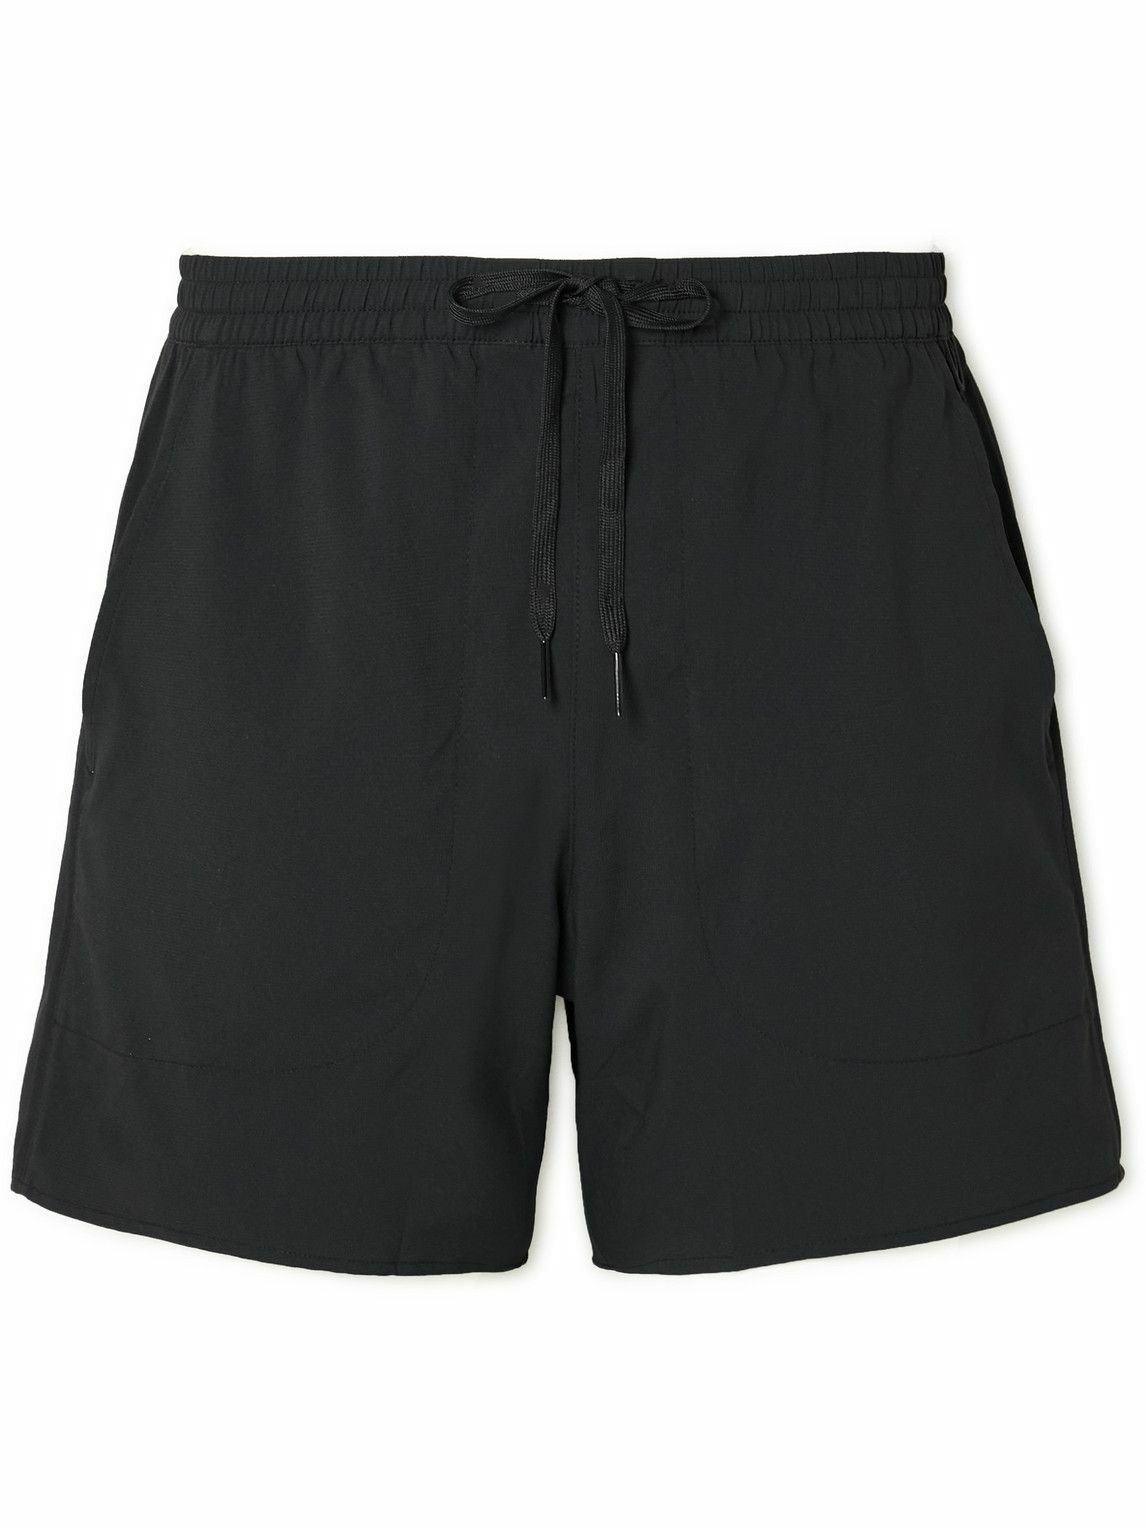 Photo: Outdoor Voices - SolarCool Ripstop Drawstring Shorts - Black